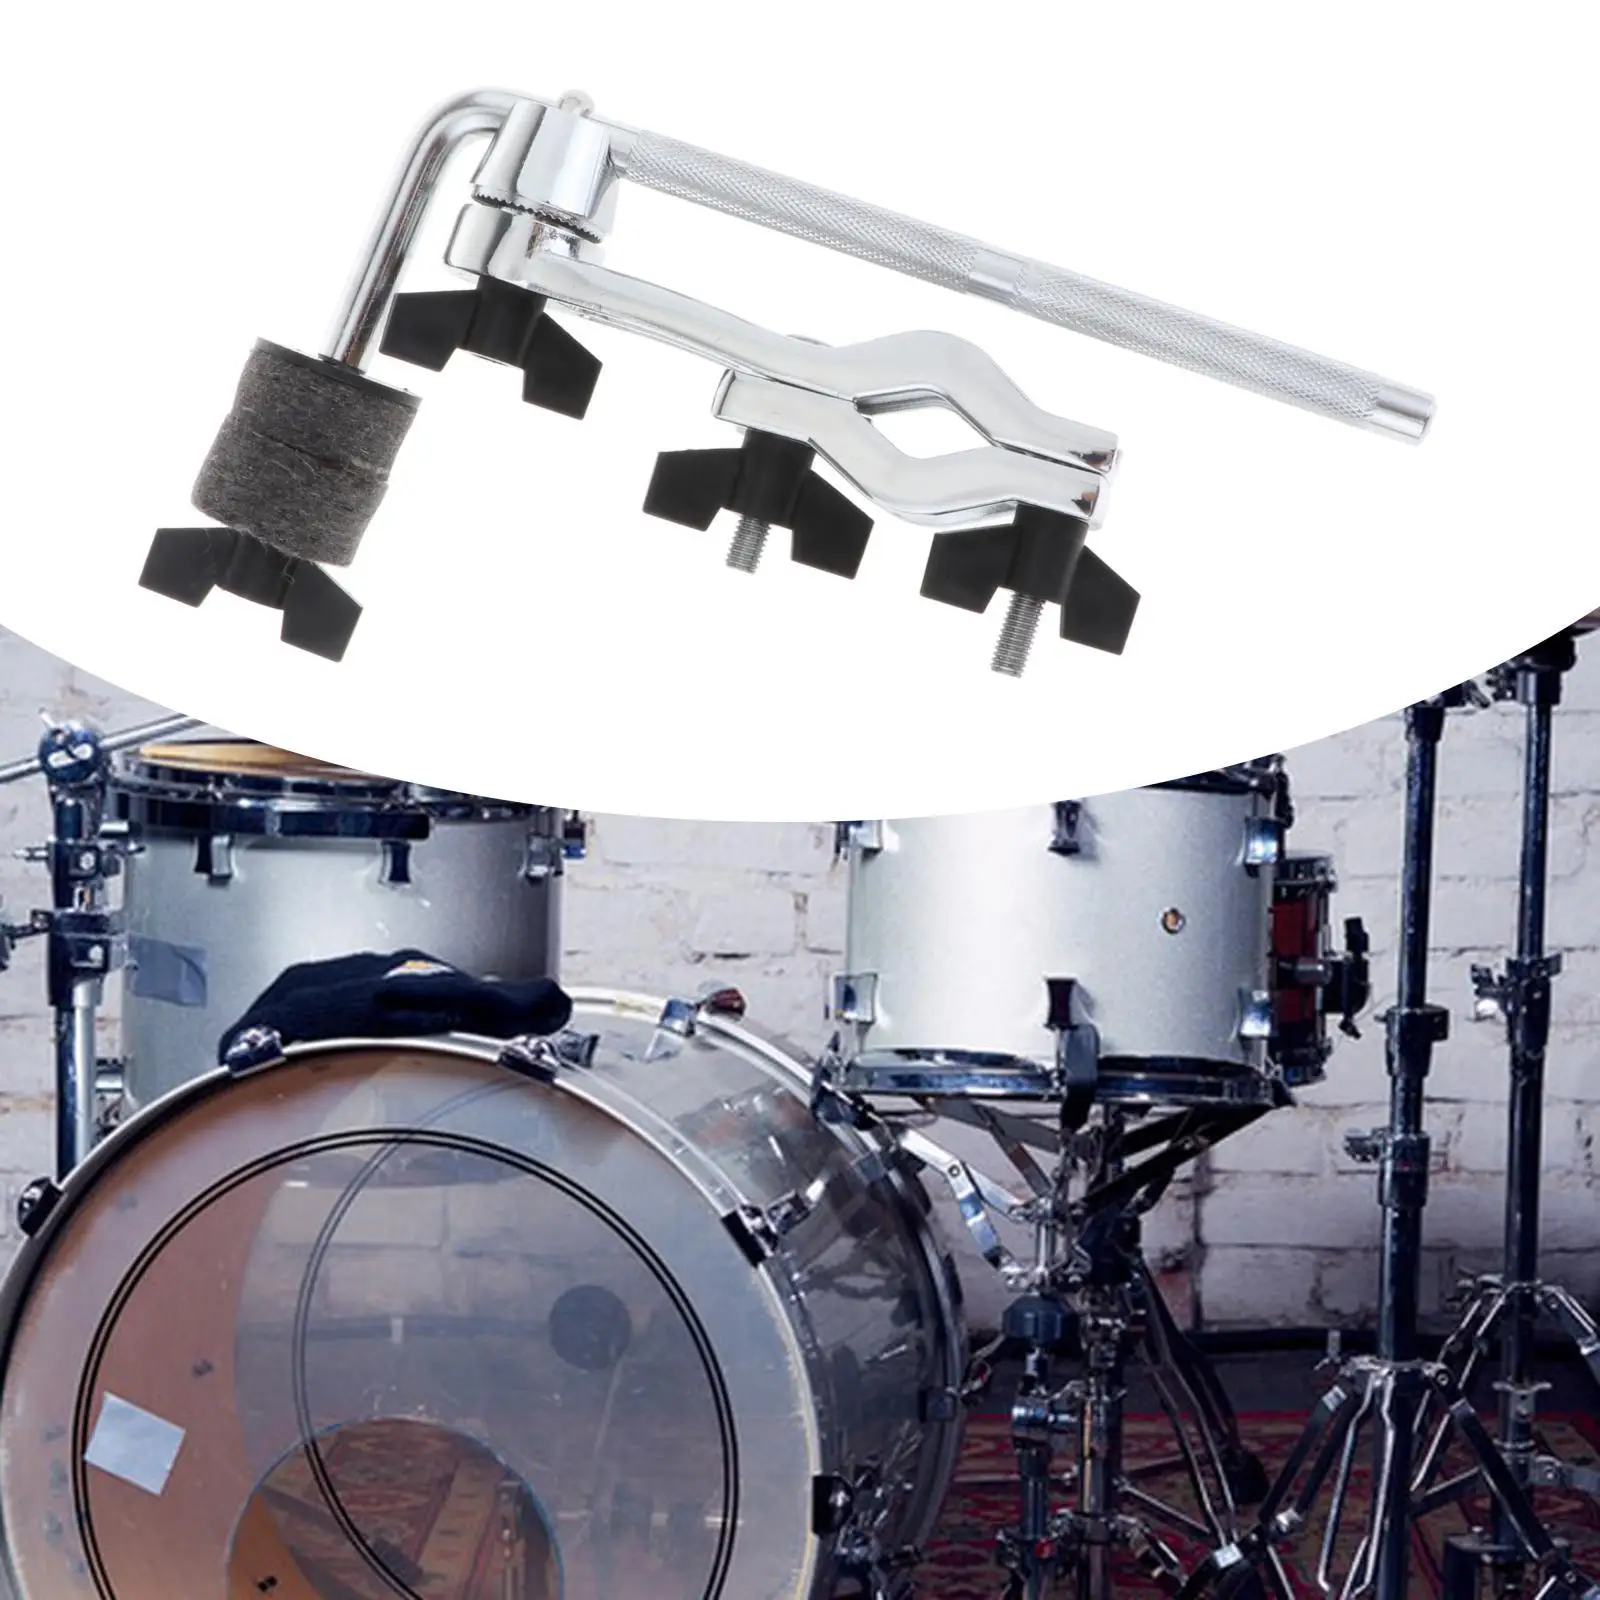 Drum Kit Clip Adjustable Replacement Accessories Heavy Duty Professional Holder